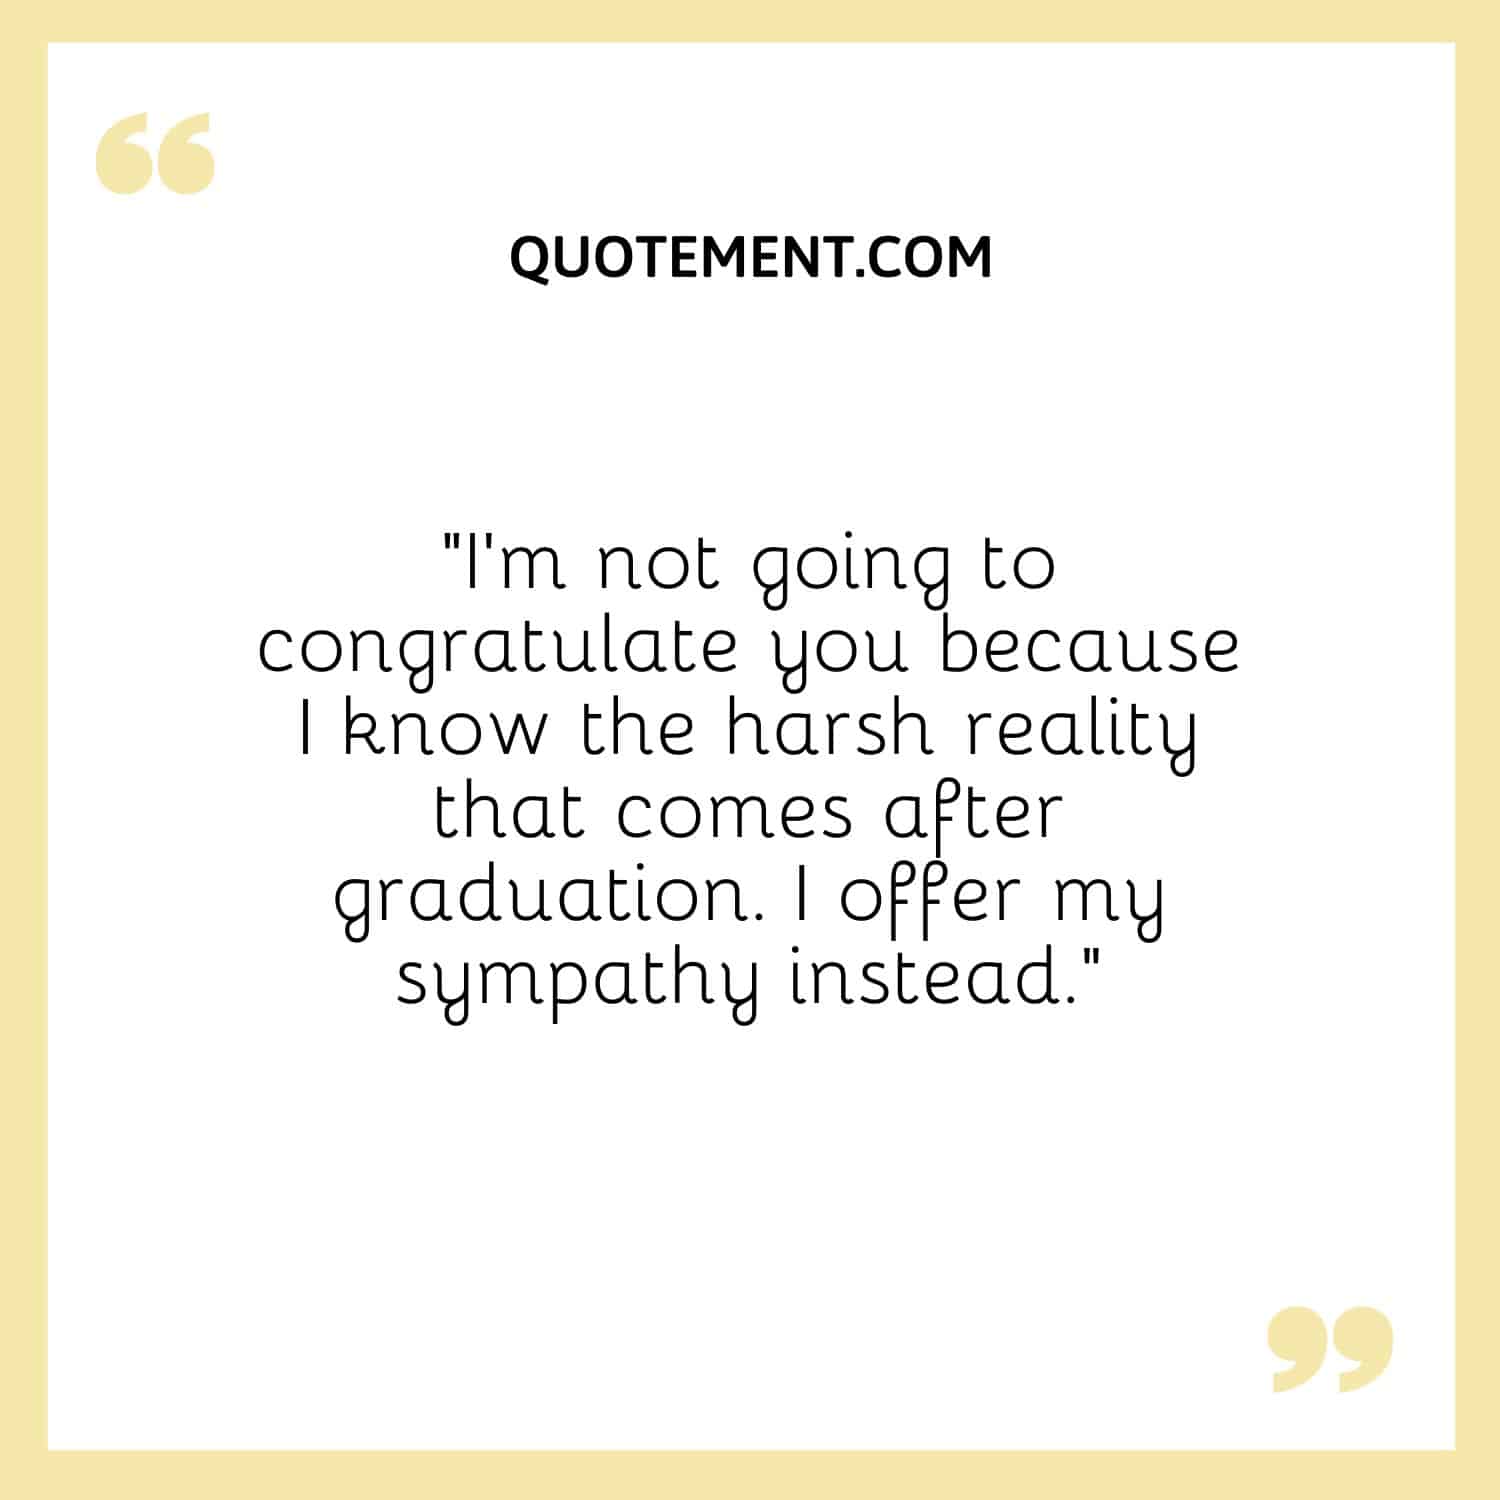 “I'm not going to congratulate you because I know the harsh reality that comes after graduation. I offer my sympathy instead.”